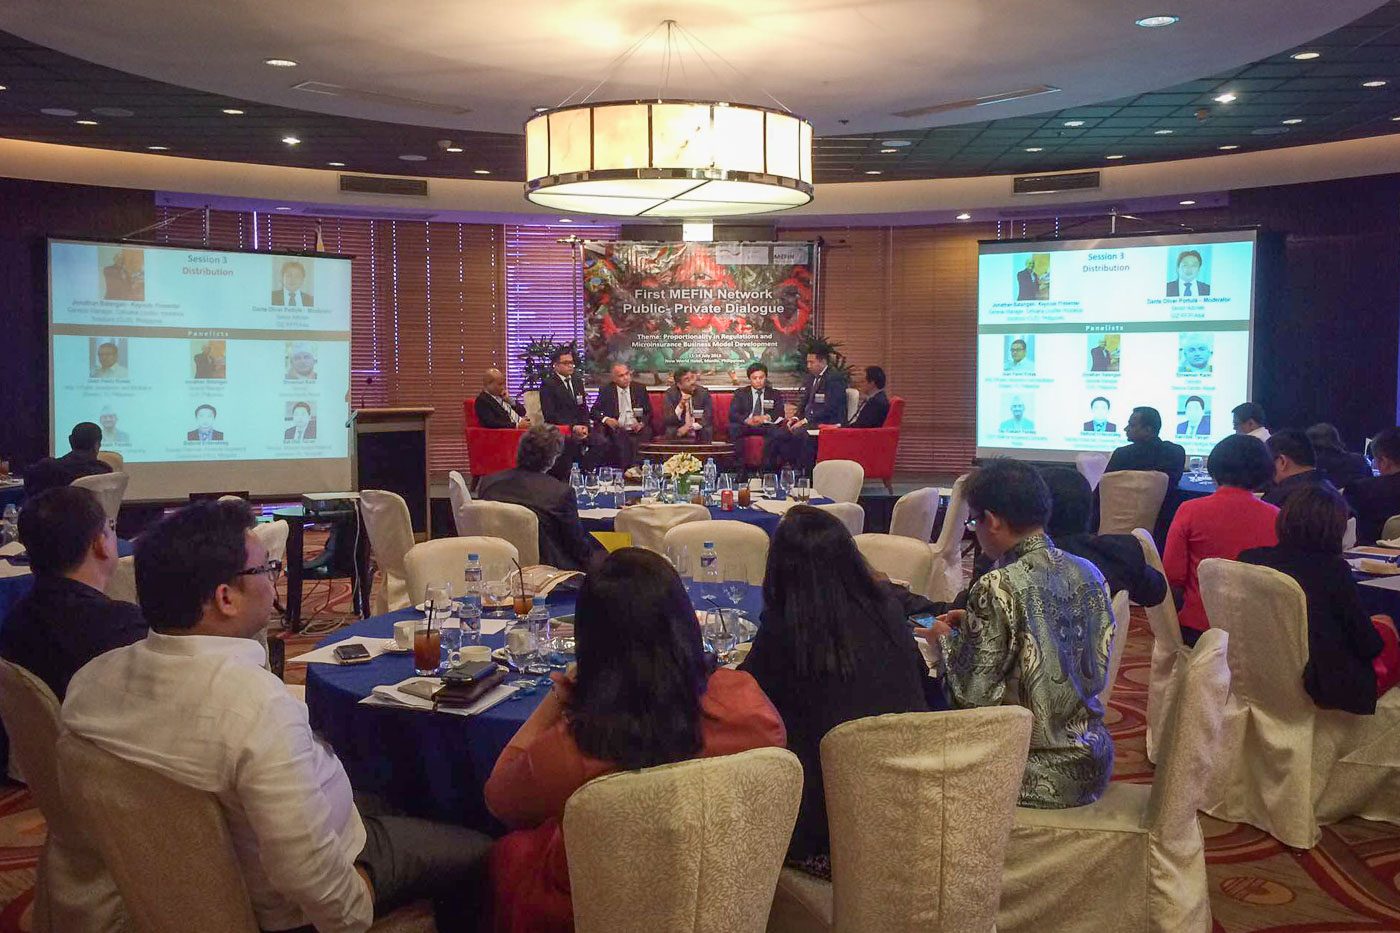 KNOWLEDGE SHARING. Government and officials from the insurance sector discuss ways to push micro-insurance at the first MEFIN Public-Private Dialogue on July 12, 2016 in Manila. 'Other countries are learning from the Philippines but at the same time they also face specific issues in distribution channels and also  requirements from law,' says Malagardis. 